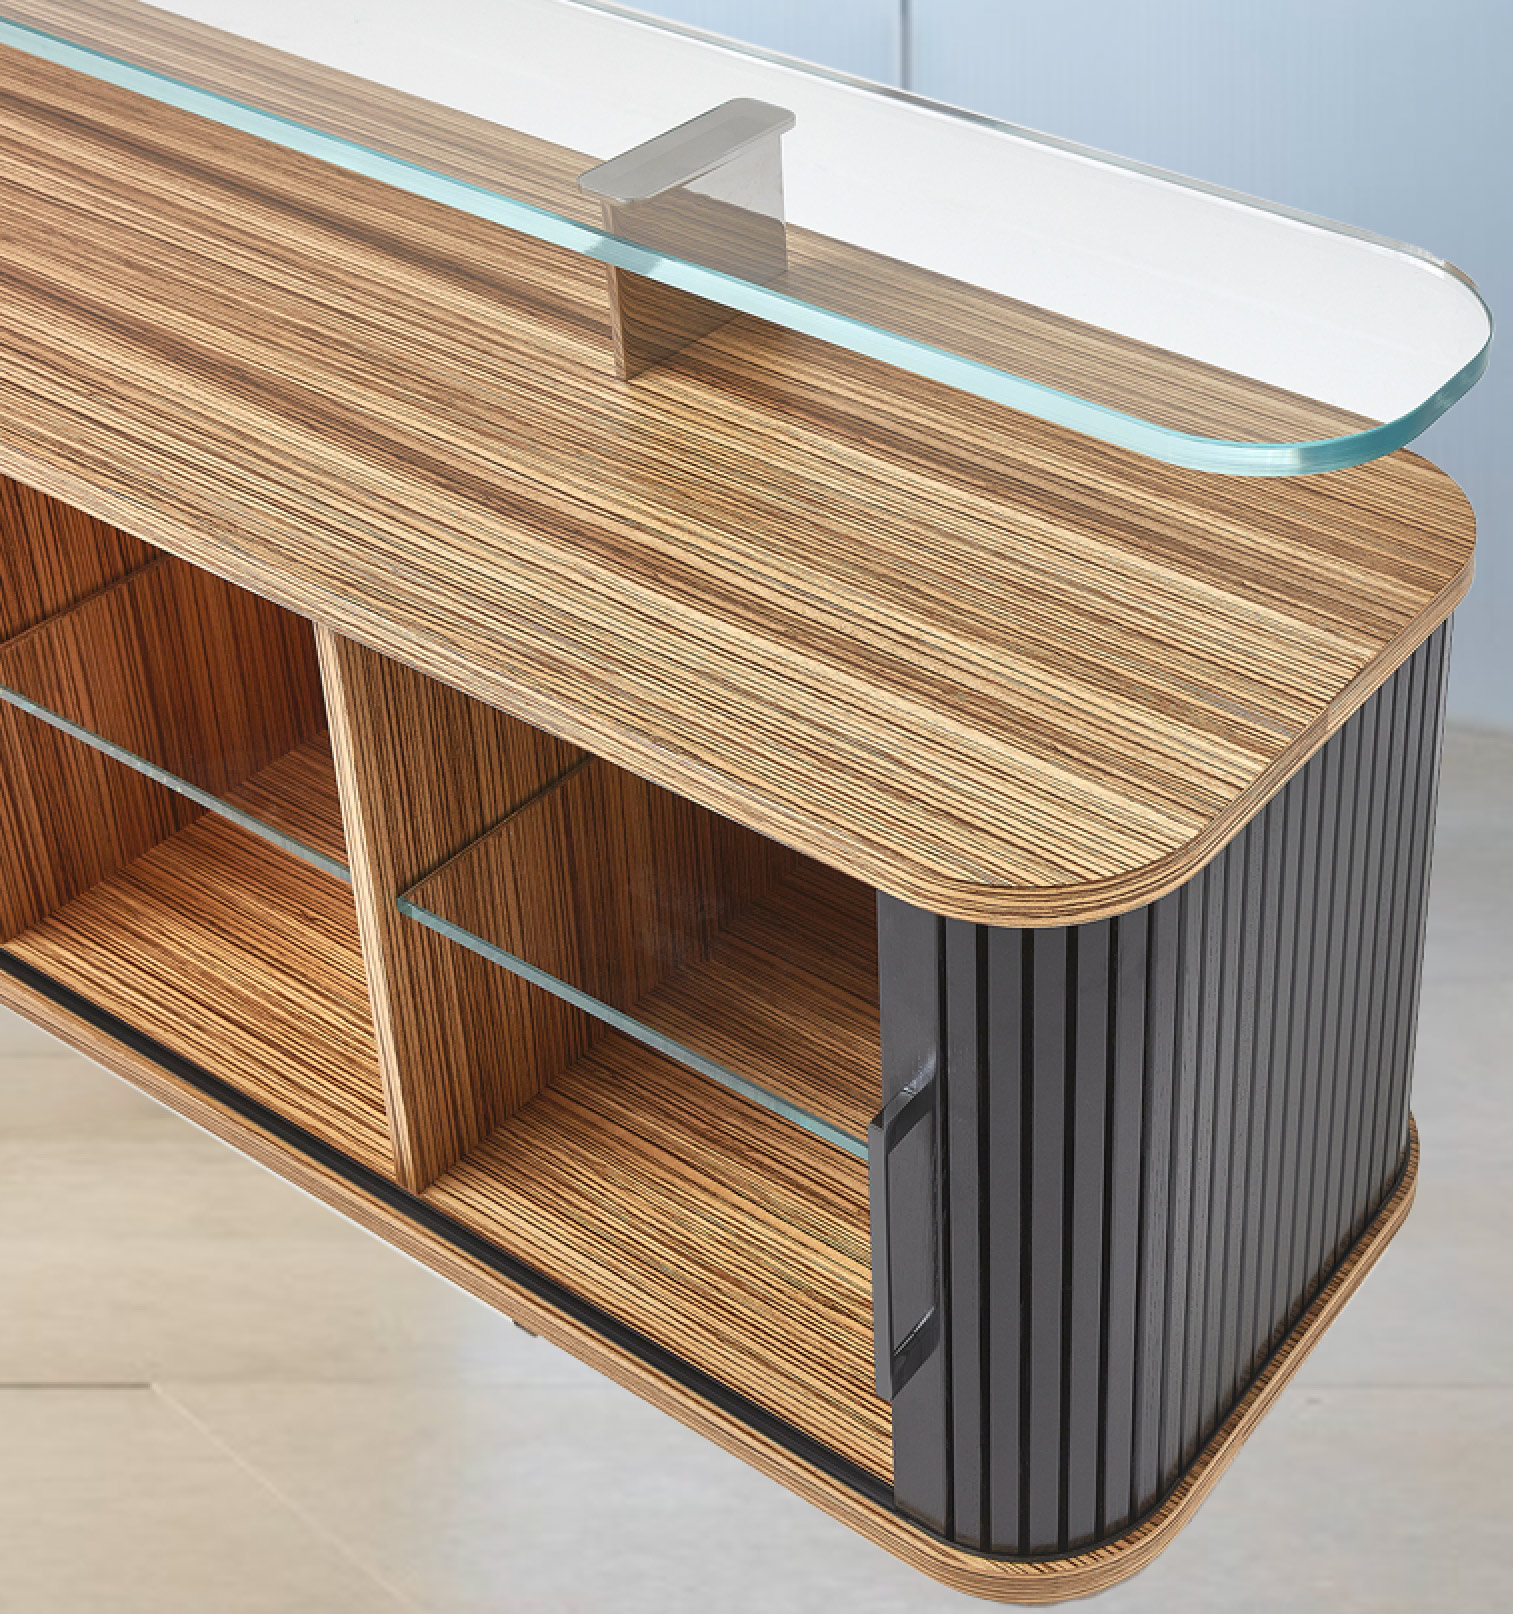 Lux Modern Credenza detail features glass, metal wood and chrome